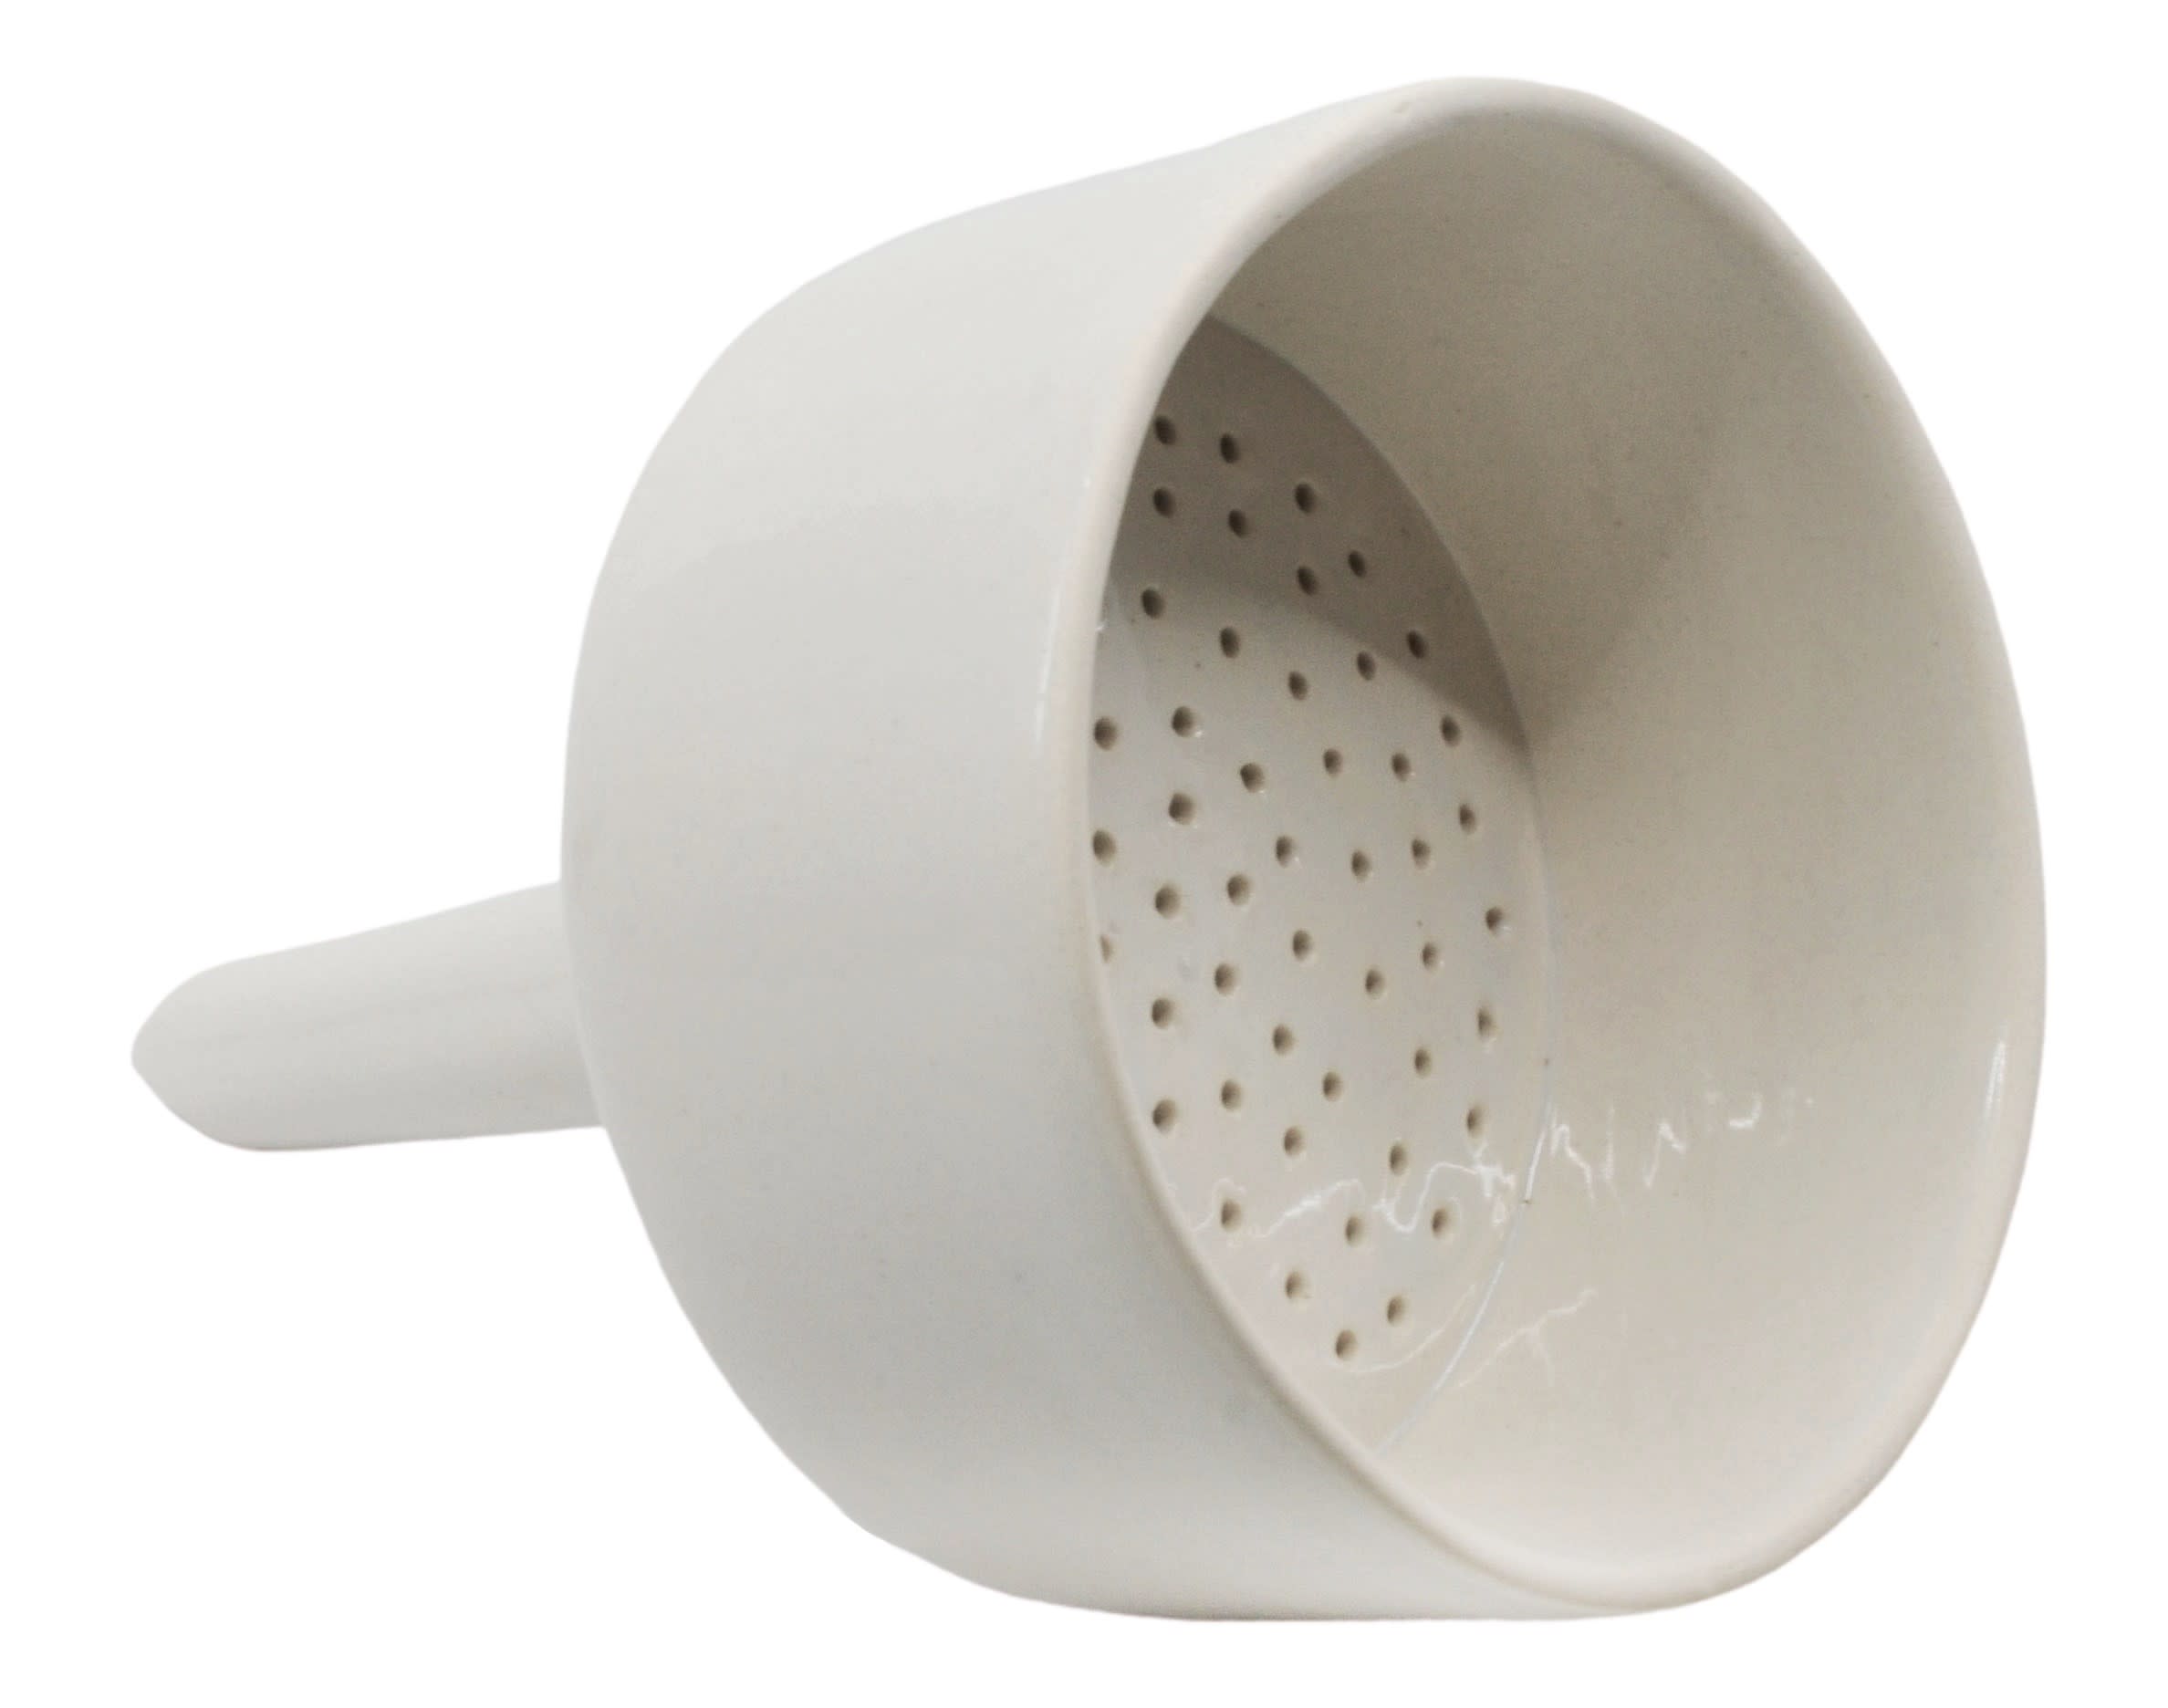 Porcelain Buchner Funnel, Perforated Plate, 12.5cm